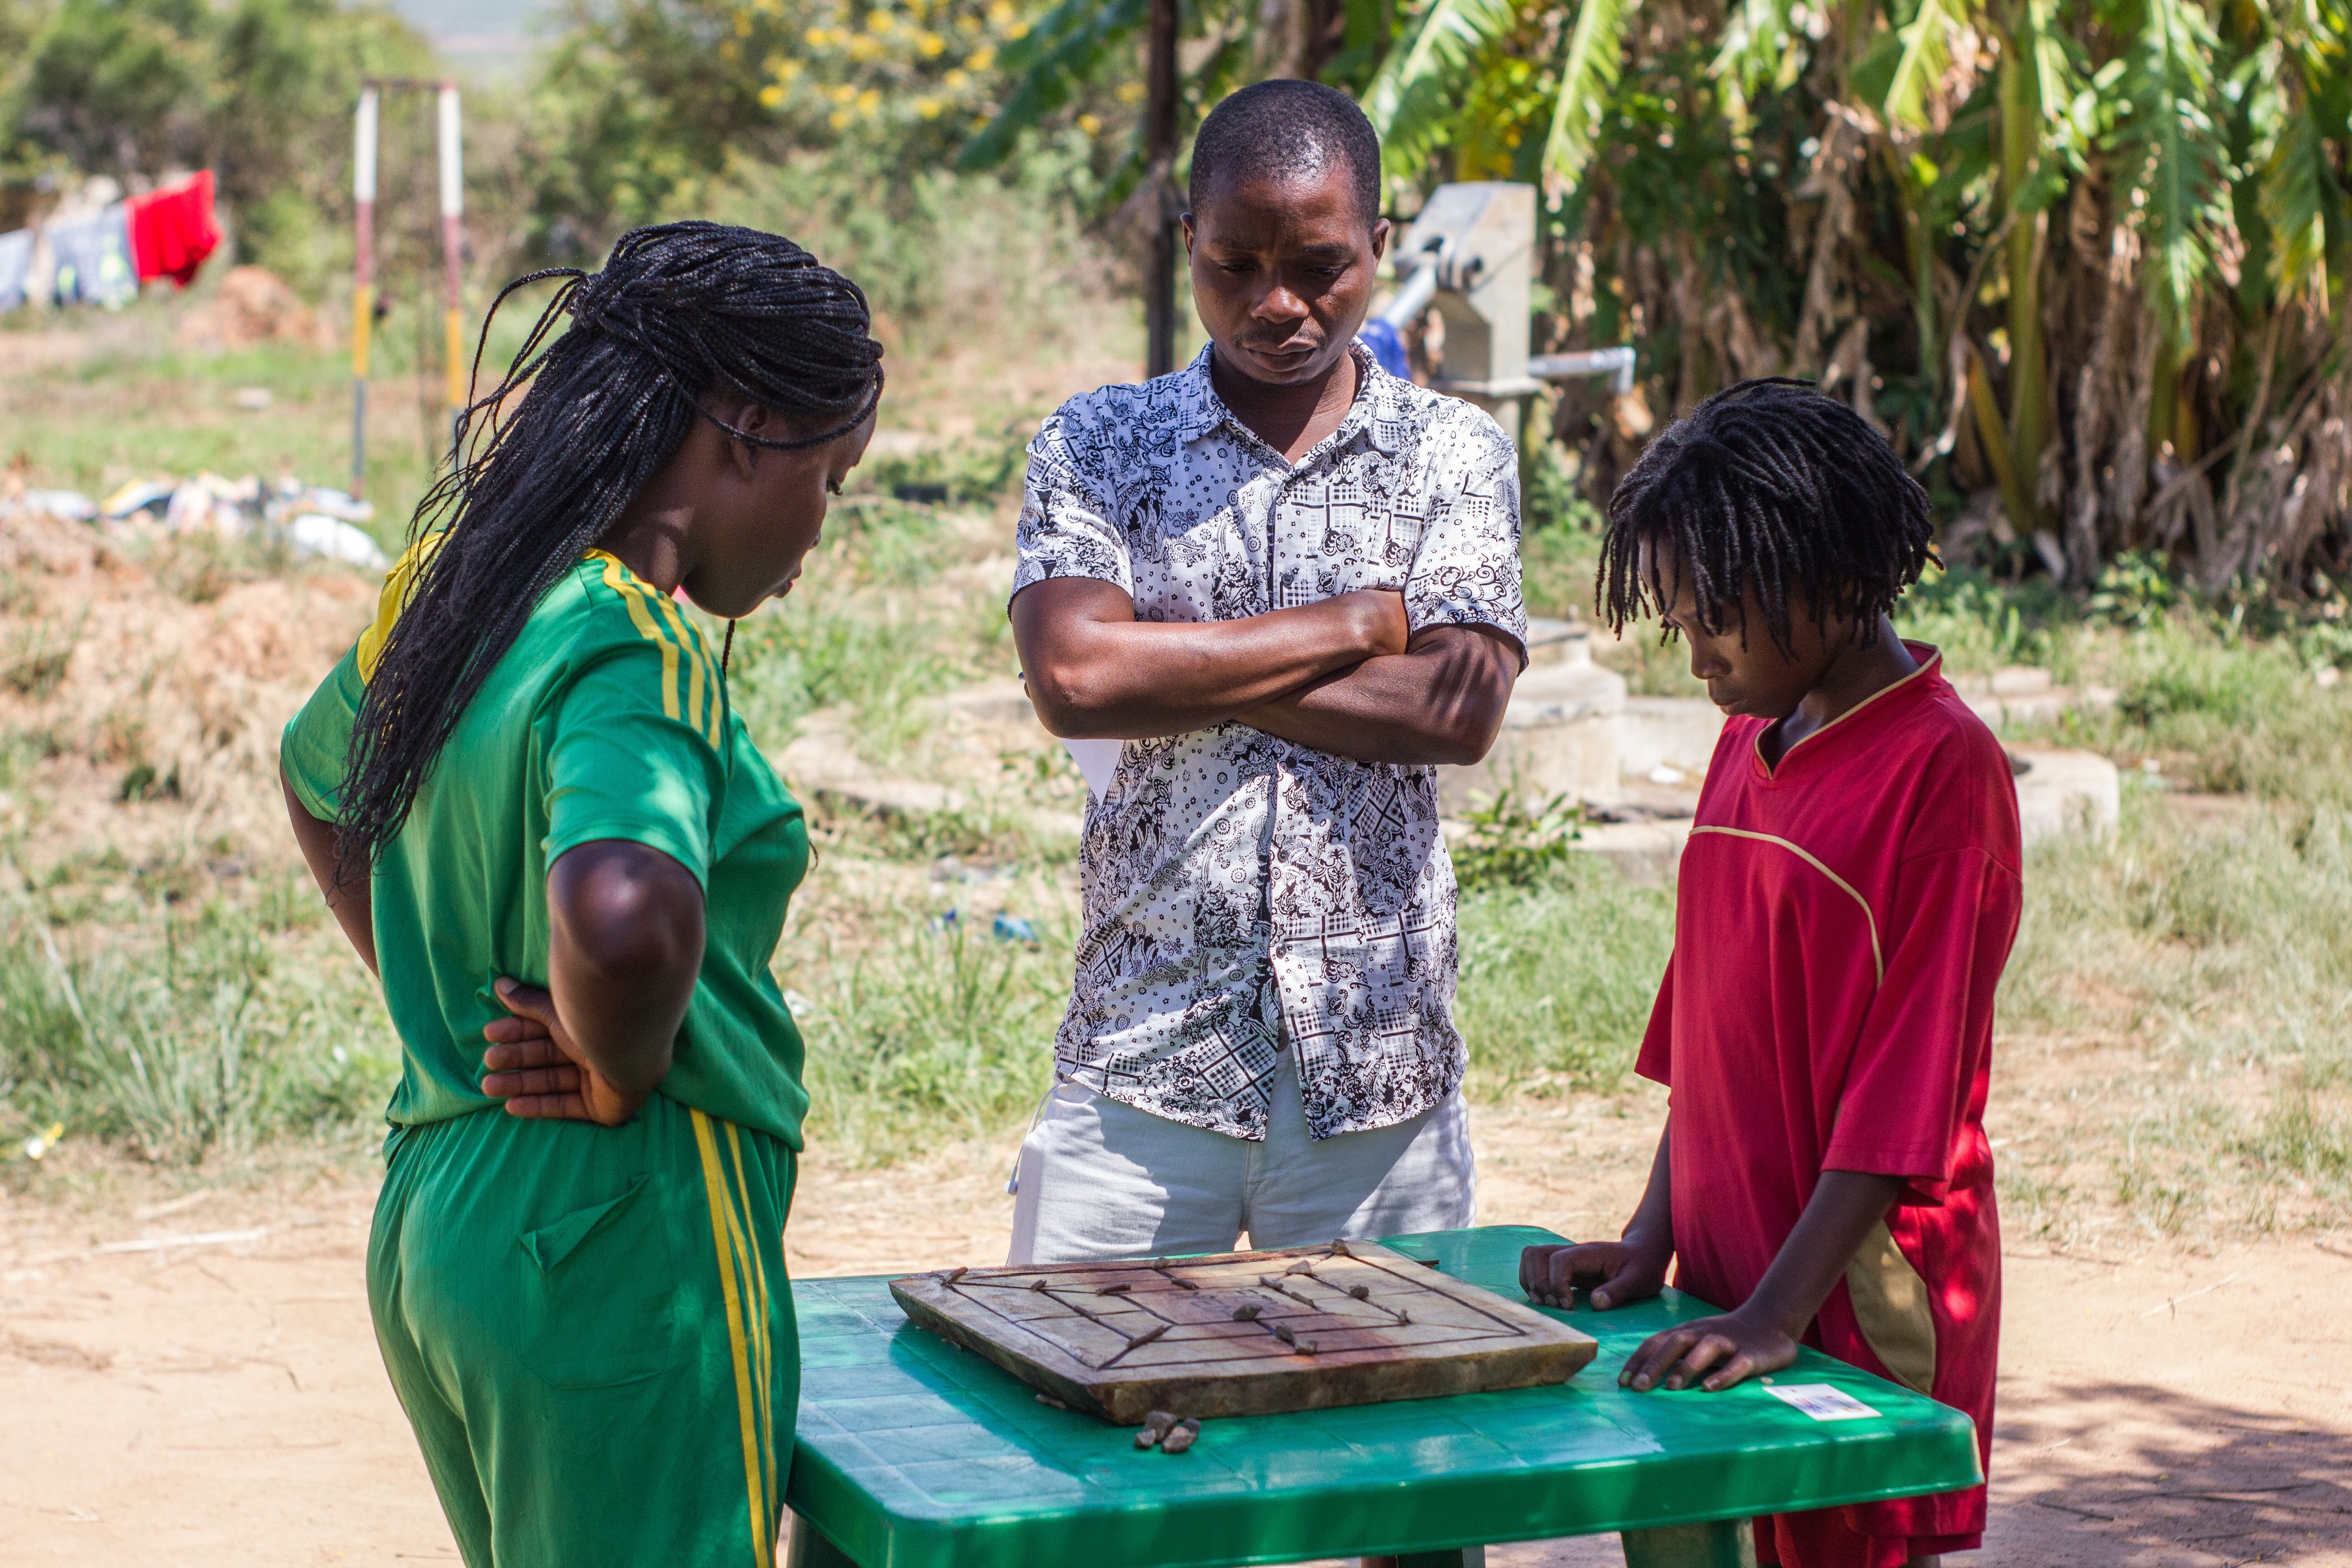 Two school chidren stand next to a table where a game of muravarava is being played, looking at the board intensely, while an umpire watches.